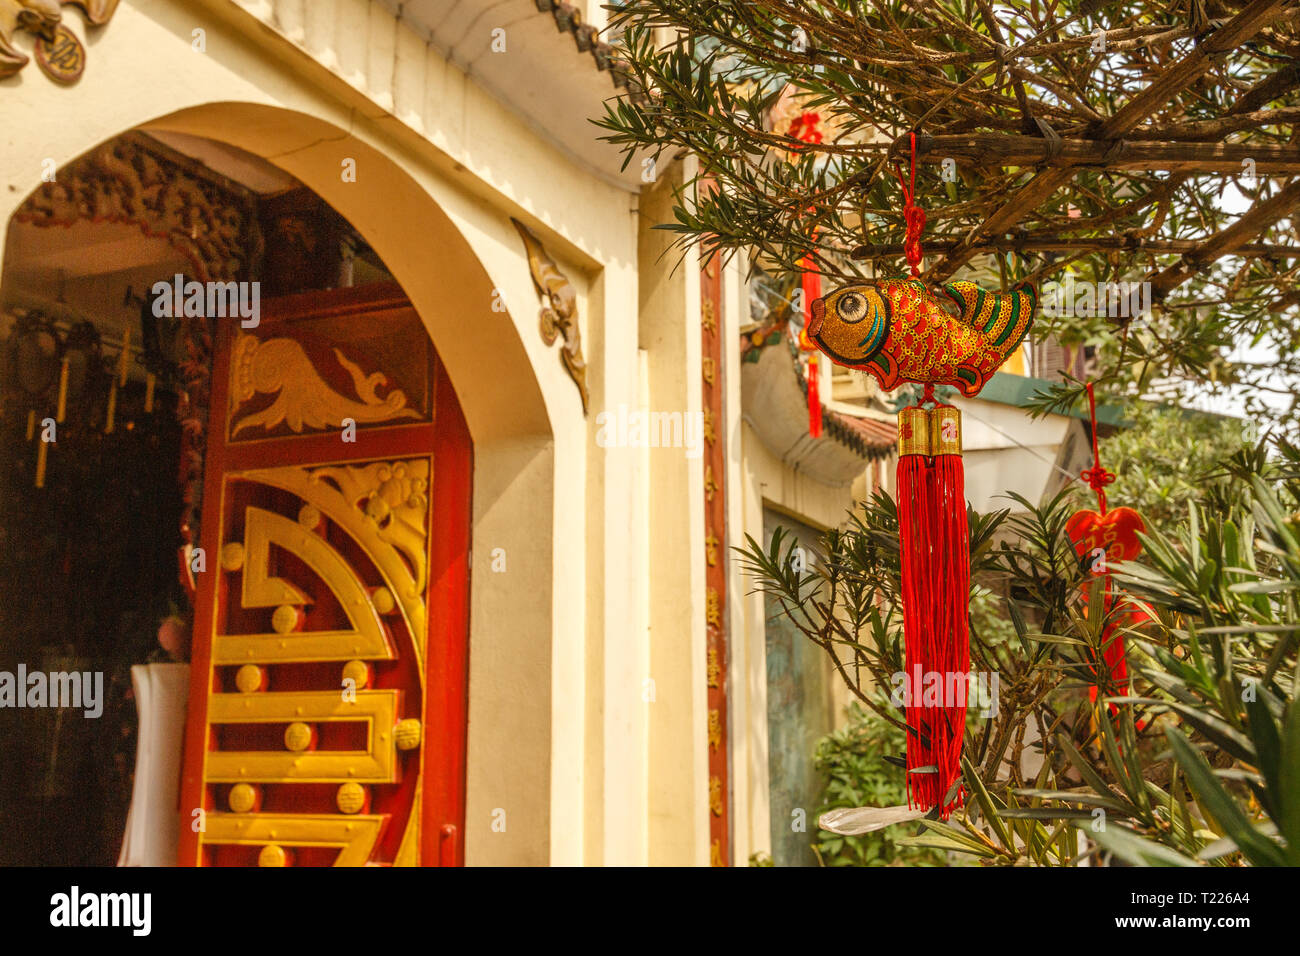 Red and gold carps hanging near Buddhist temple in Old Quarter - decoration for celebrating Tet, Vietnamese new year in Hanoi, Vietnam. Stock Photo